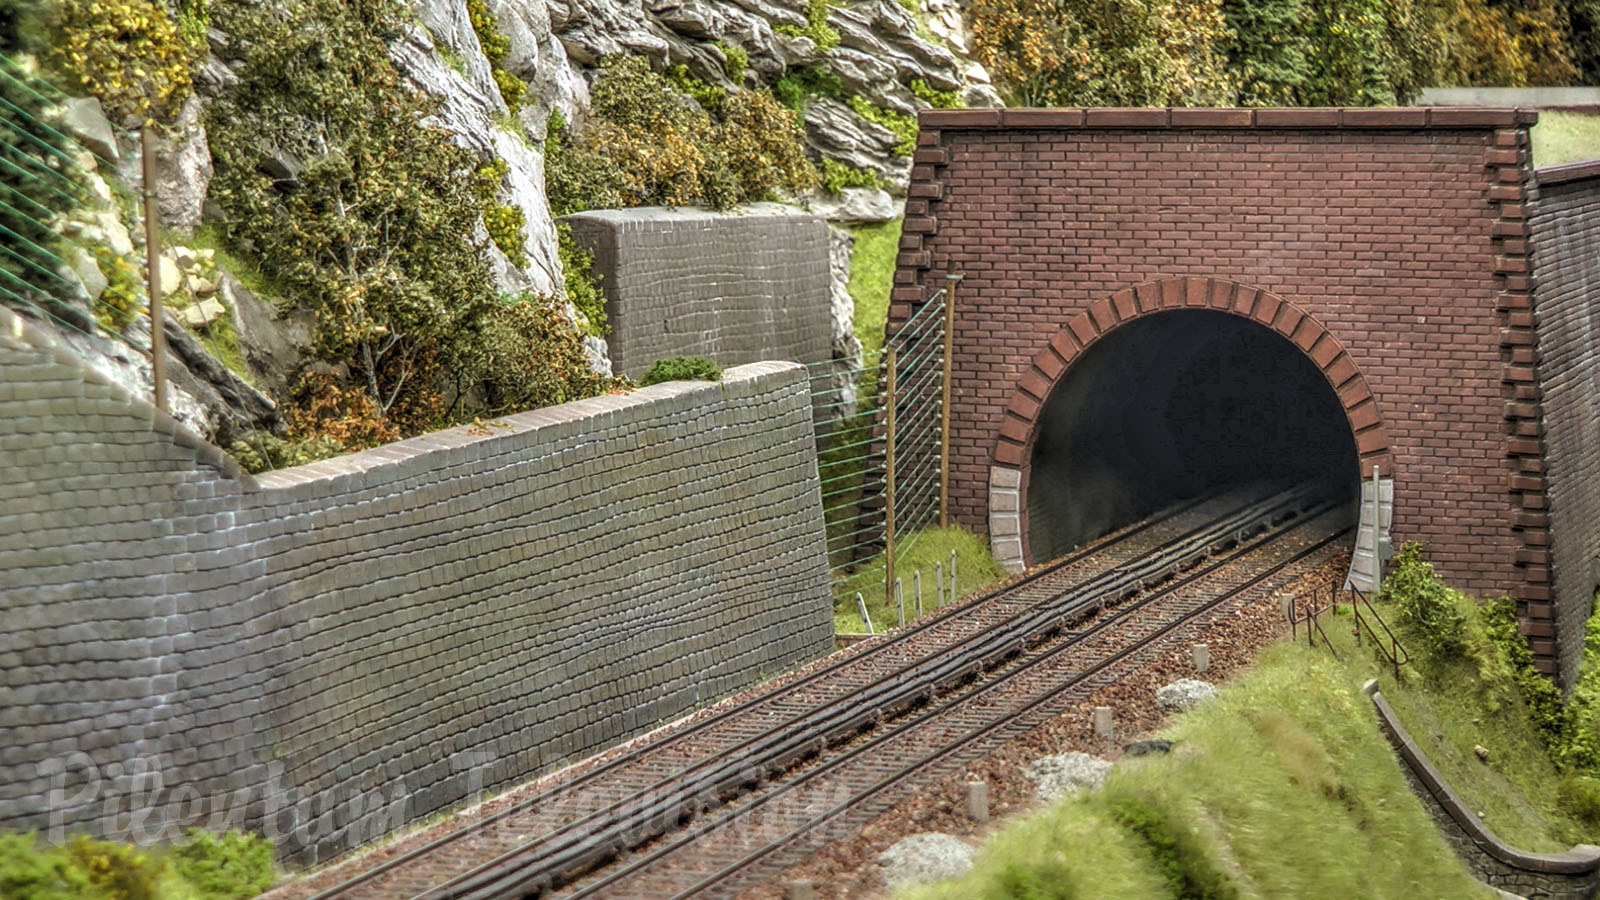 One of the nearly realistic French model railroad layouts - HO scale model trains of SNCF in France